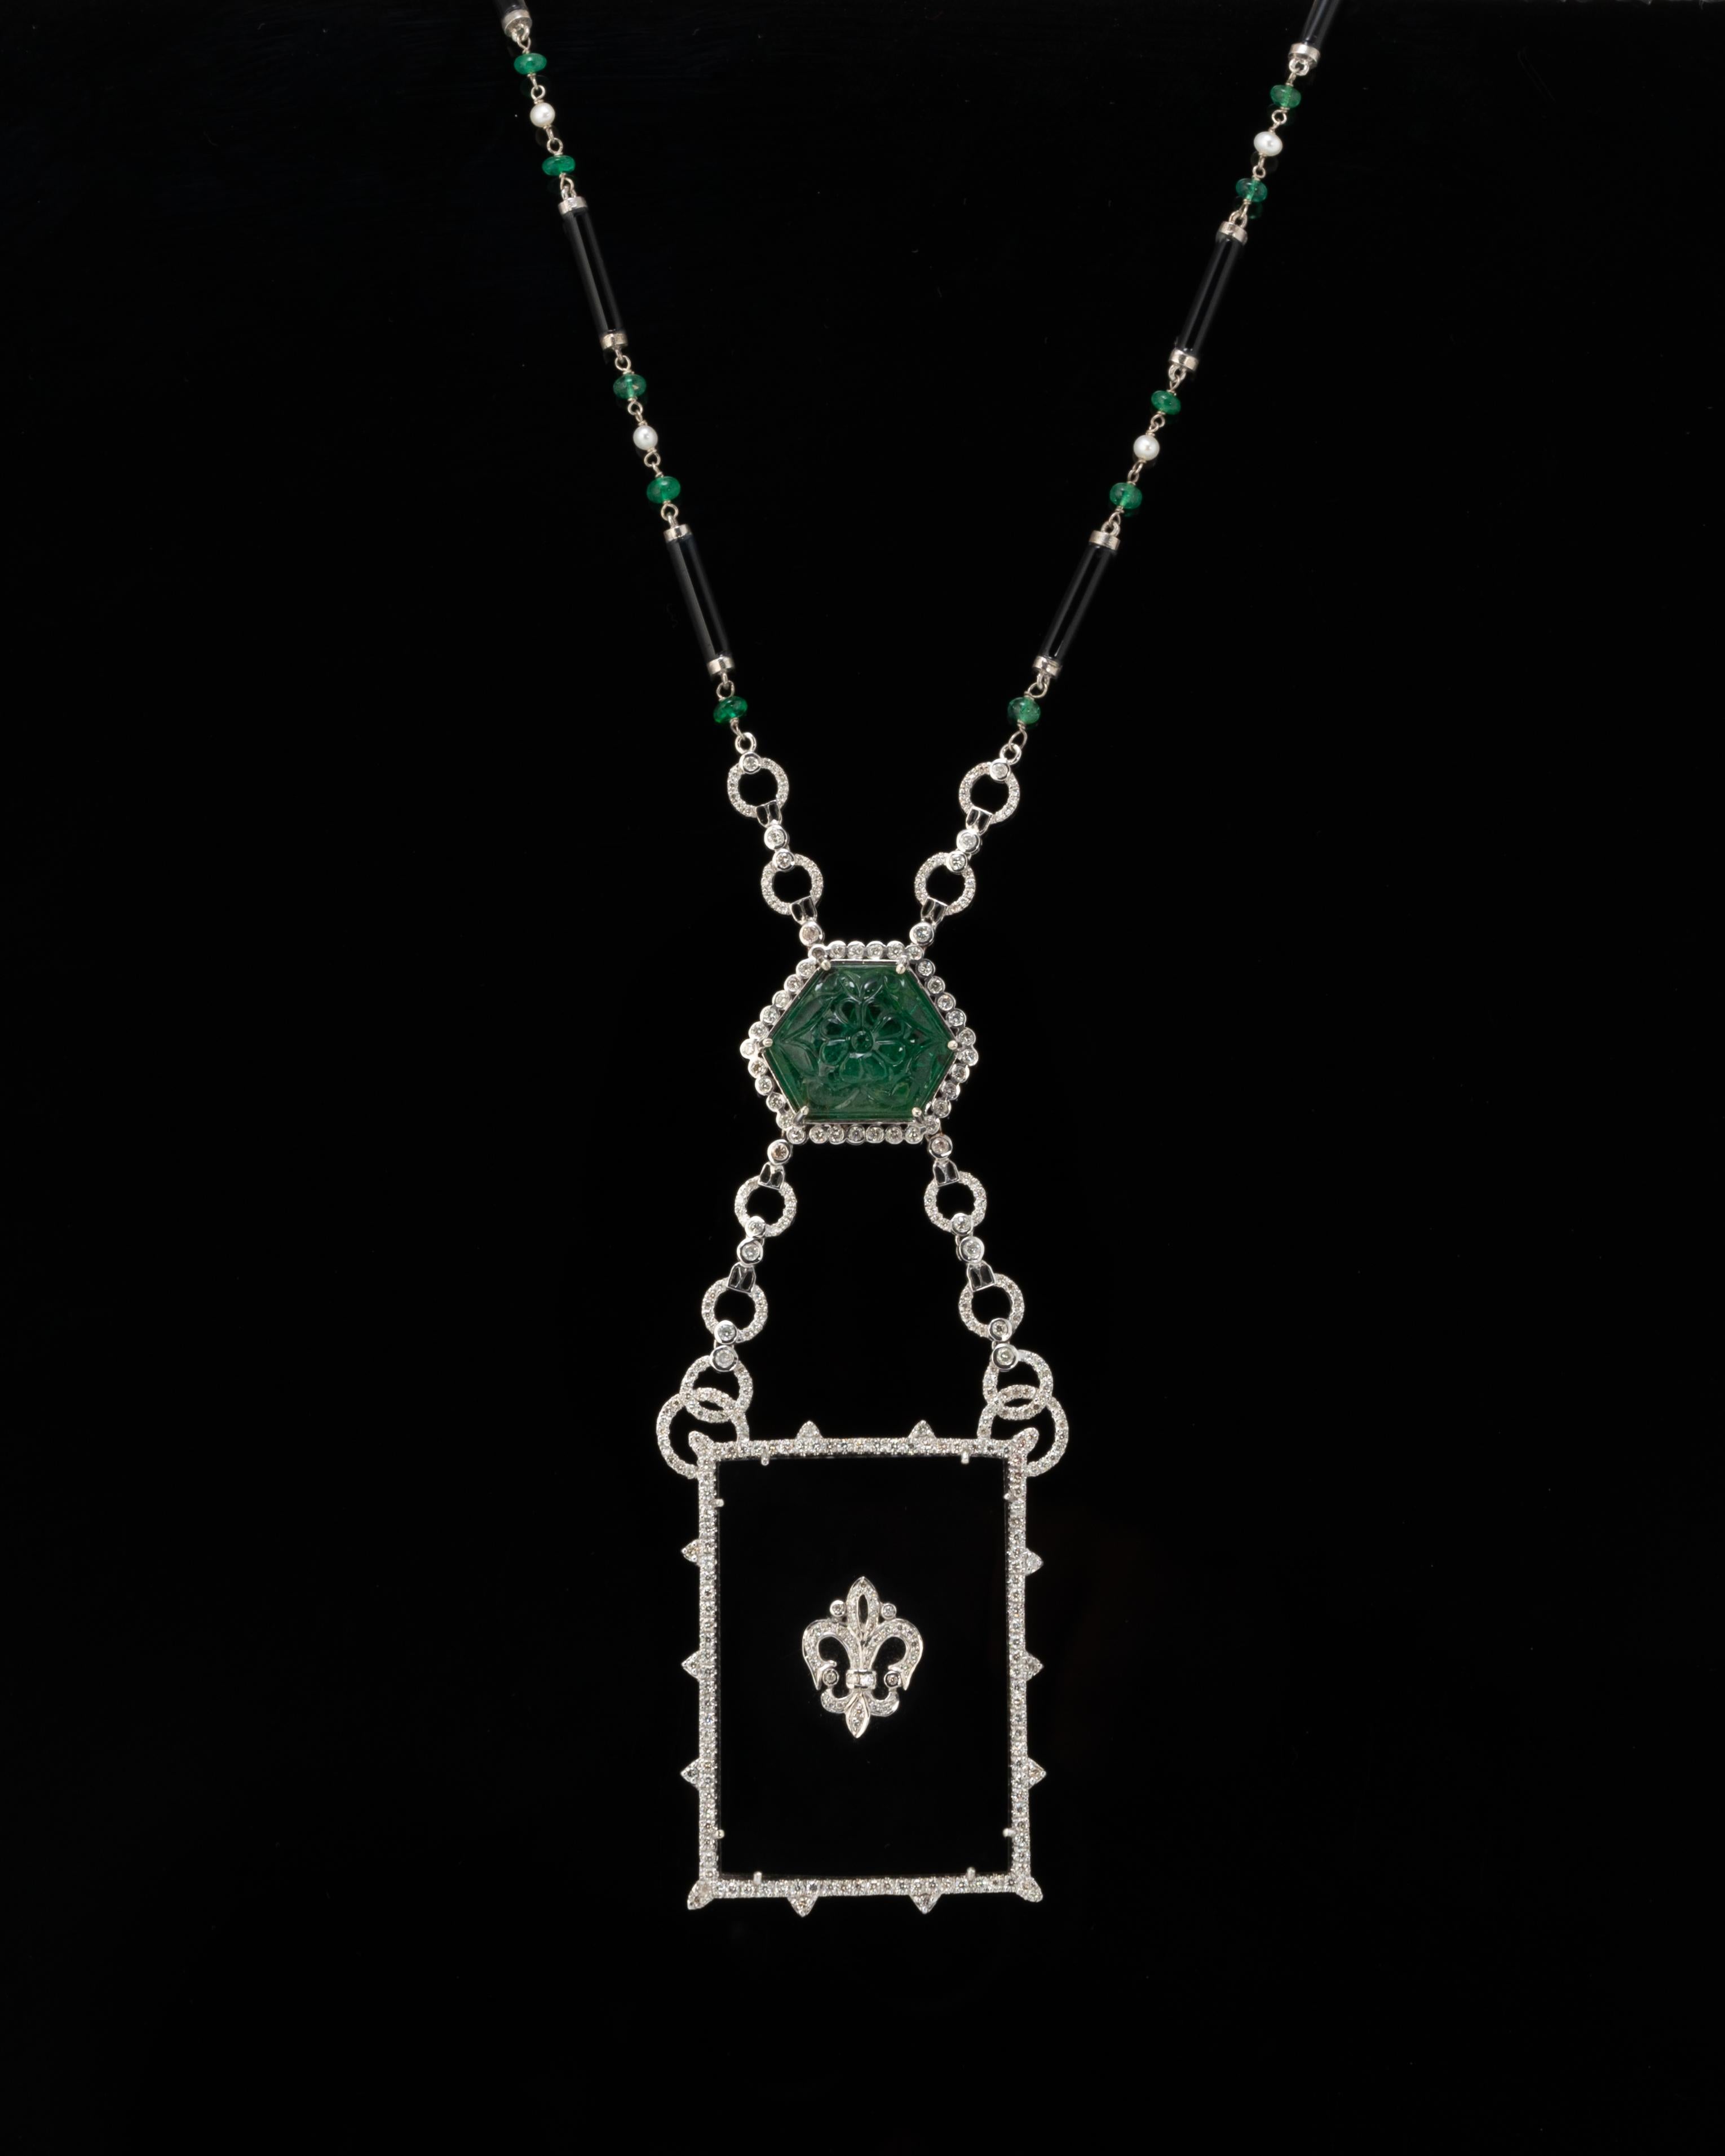 A very unique, art-deco 19.74 carat natural Zambian Emerald Carving and Black Onyx Necklace, with White Diamonds all set in 18K White Gold. The chain is 34 inches long, made using Zambian Emerald beads, Black Onyx and Diamonds. The length of the